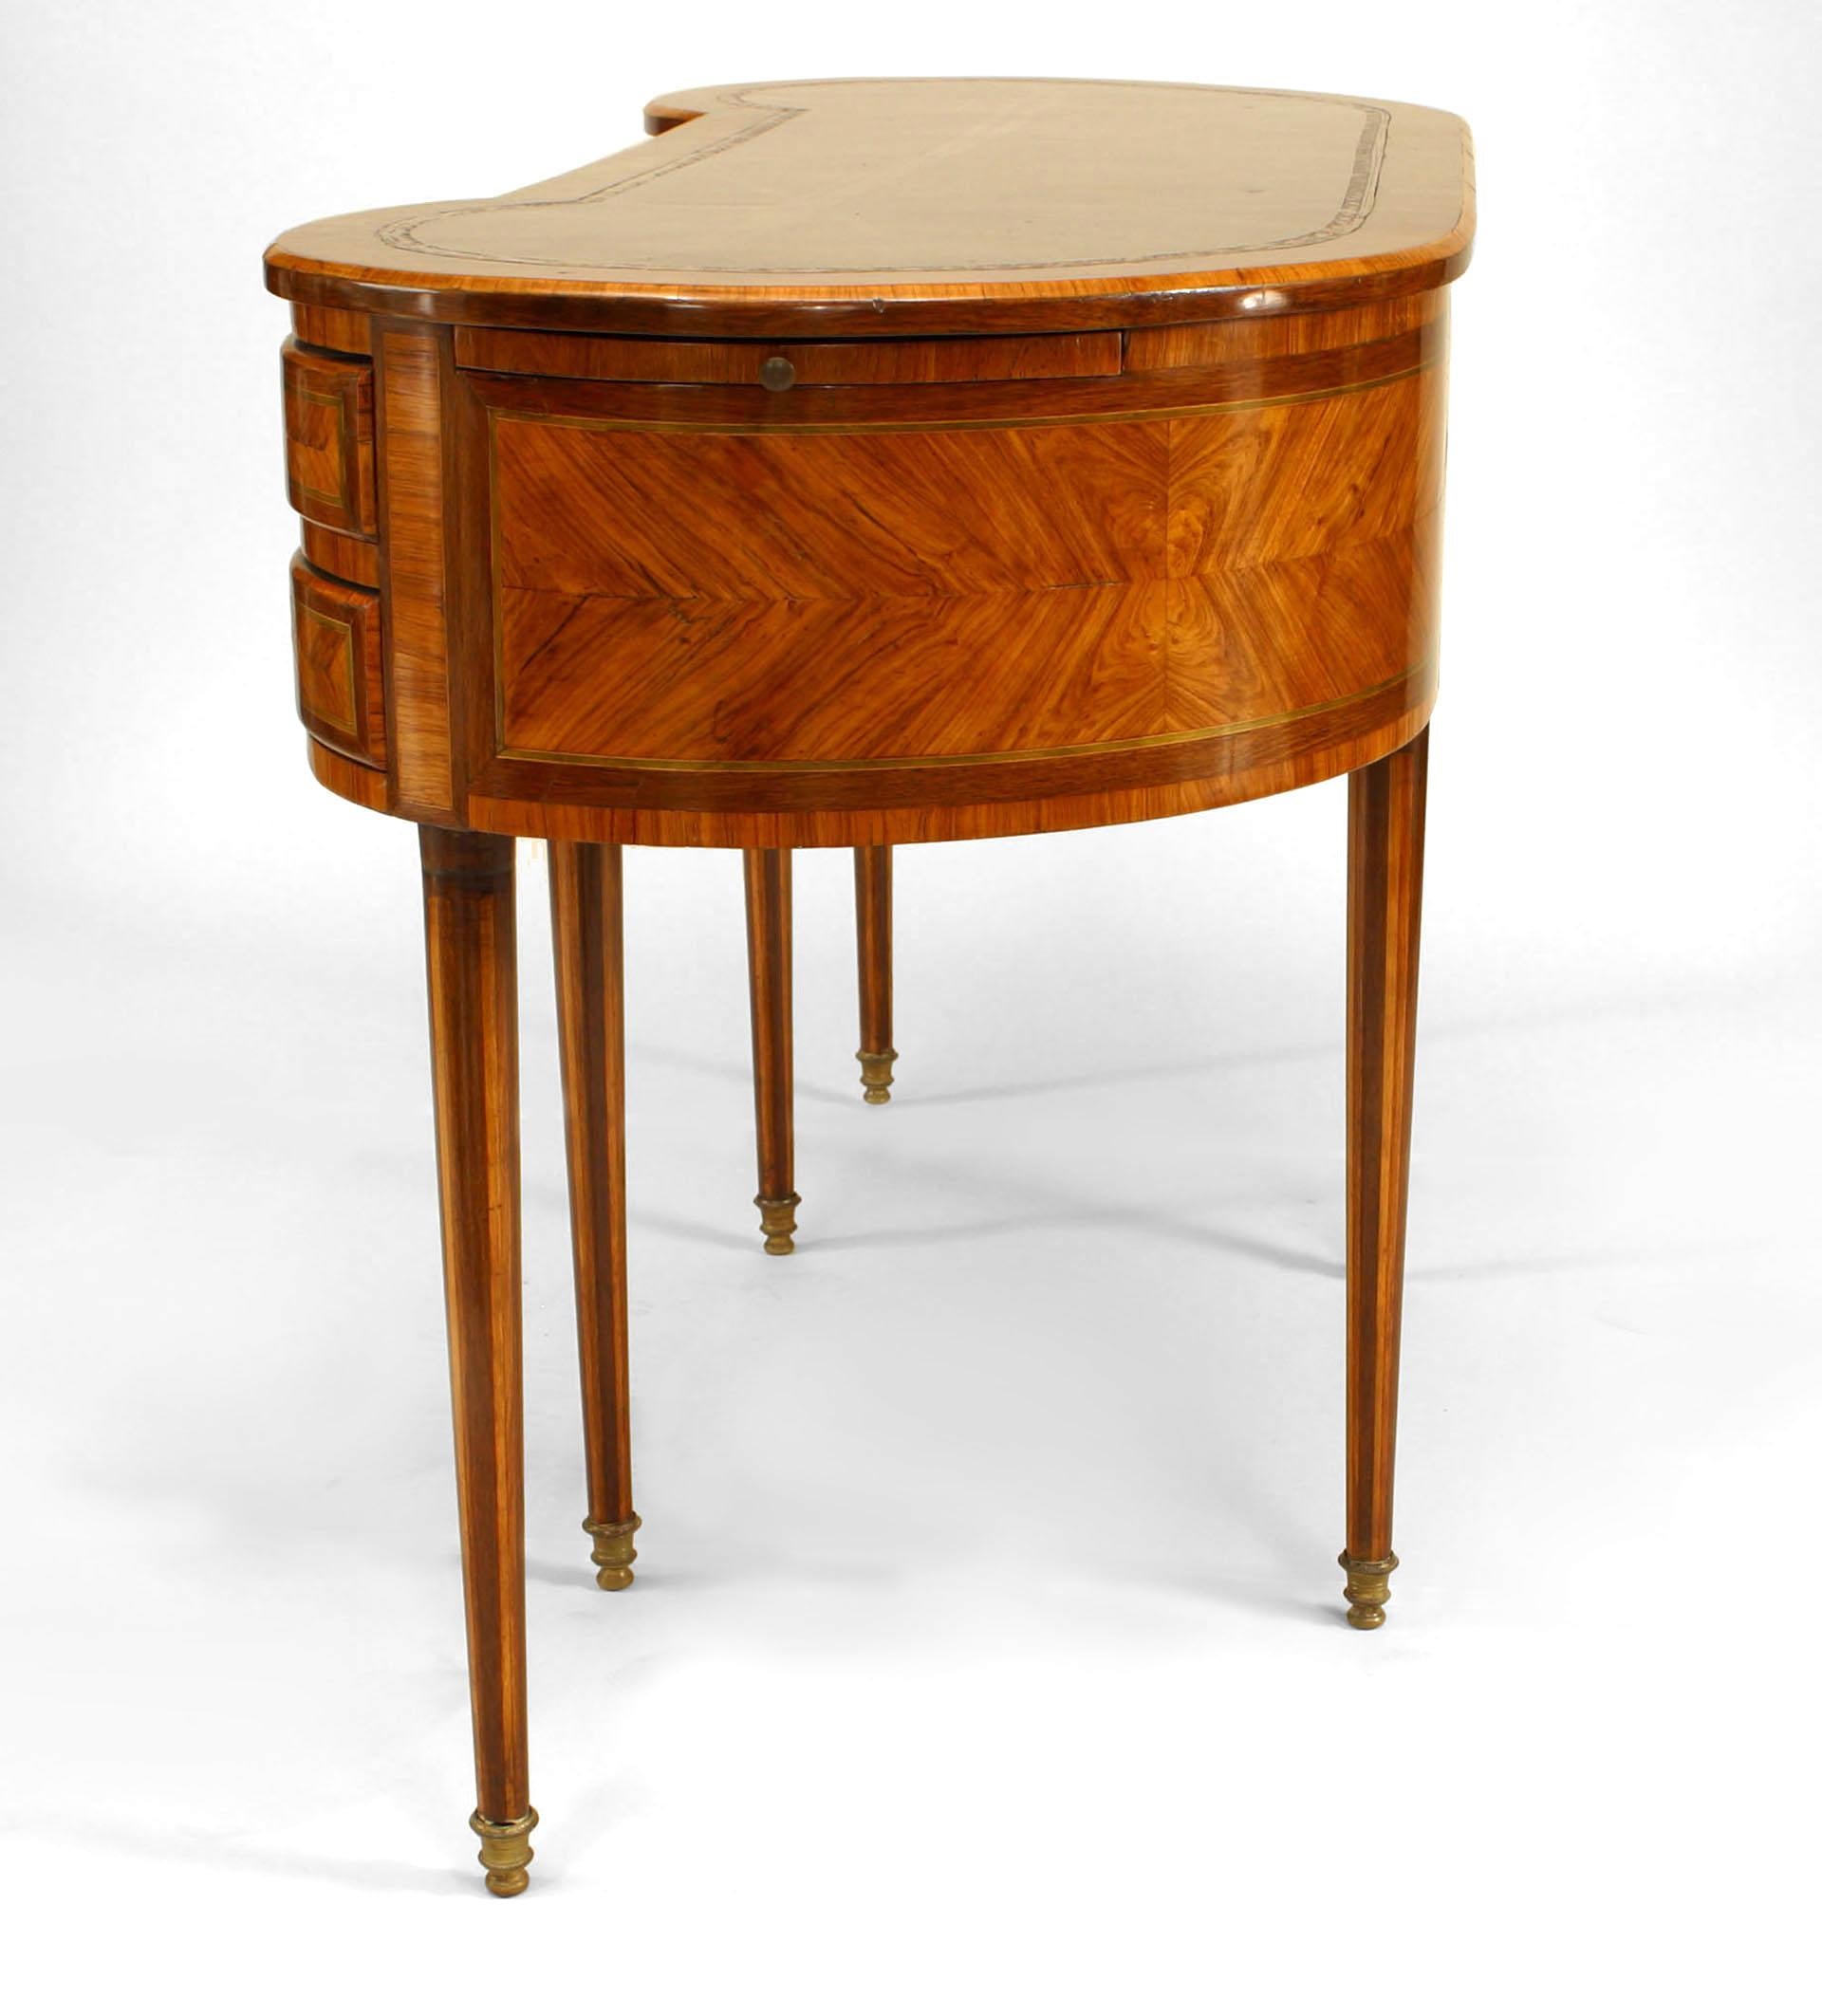 19th Century French Louis XVI Style Satinwood and Inlaid Kidney Desk For Sale